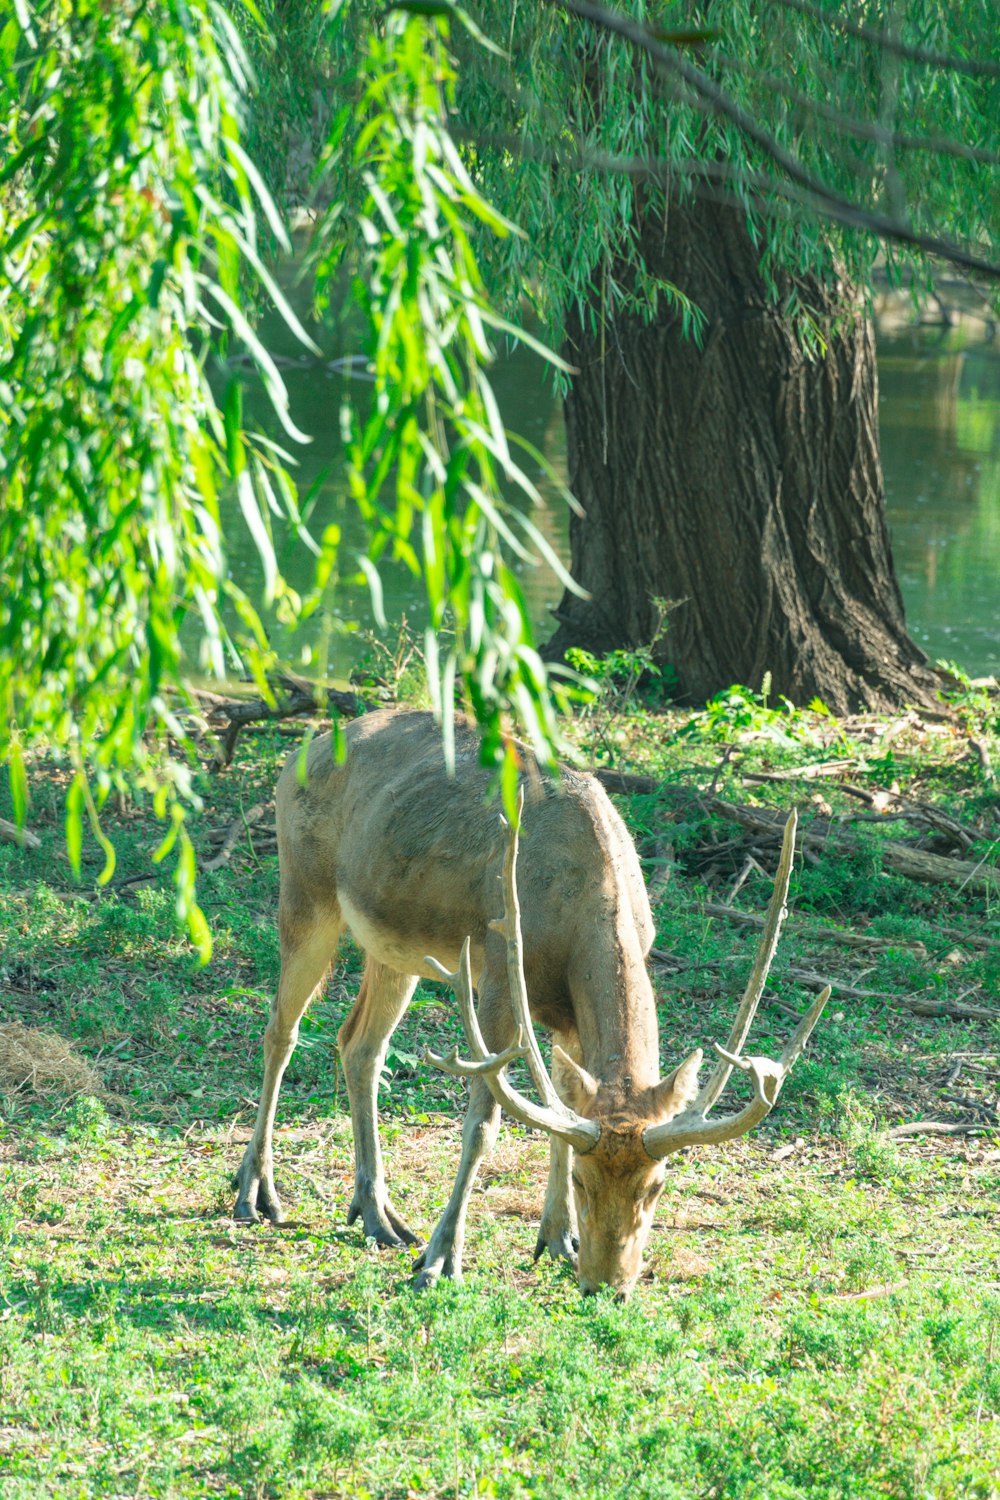 a deer with antlers eating grass